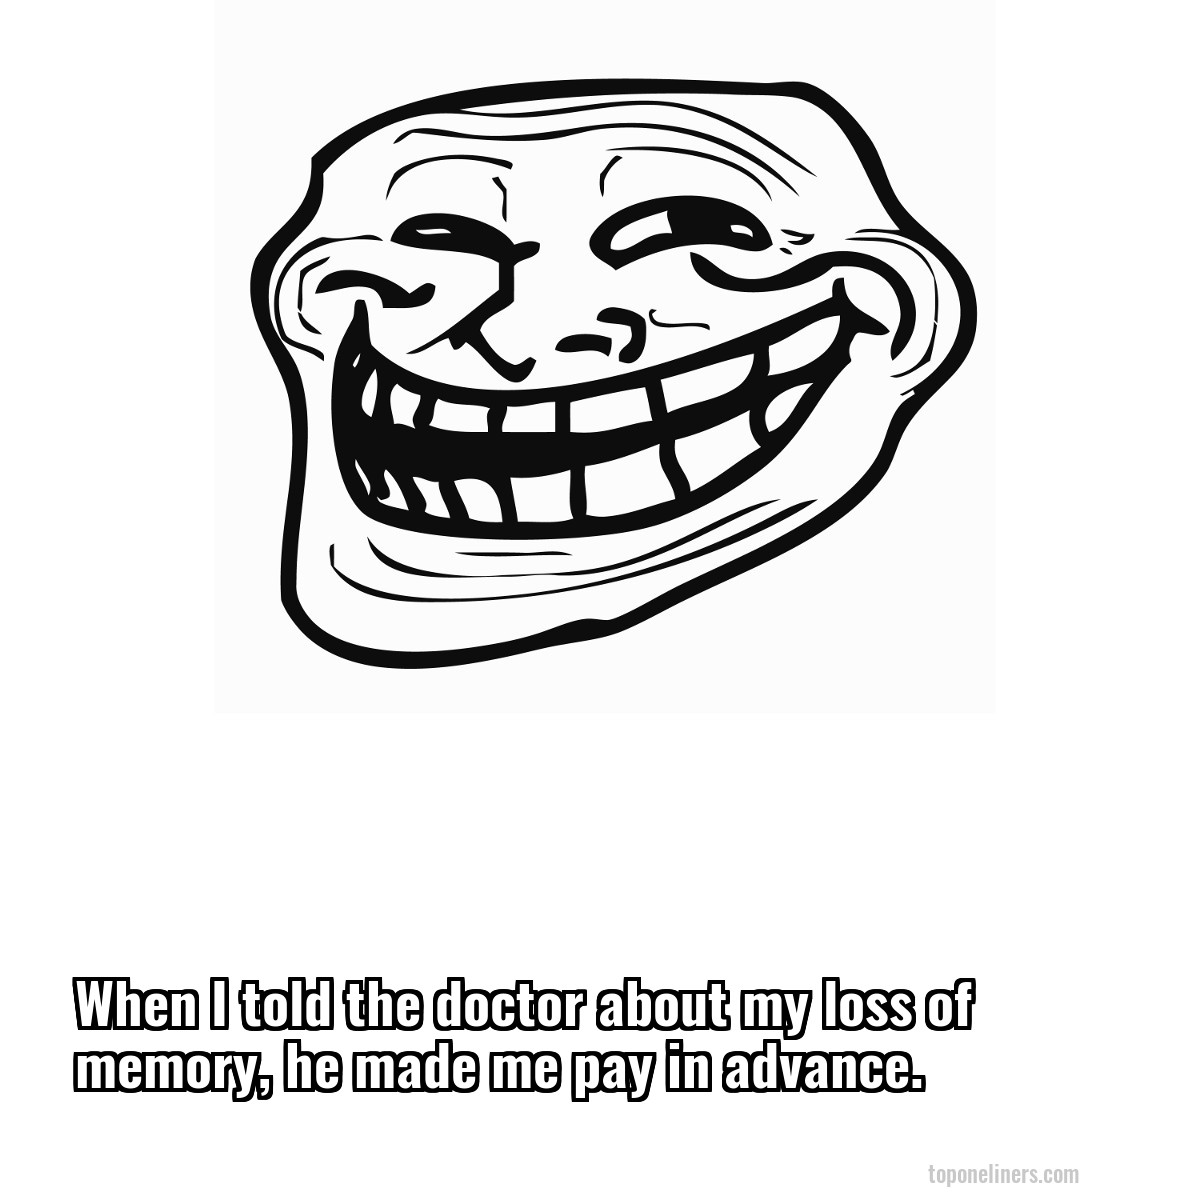 When I told the doctor about my loss of memory, he made me pay in advance.
